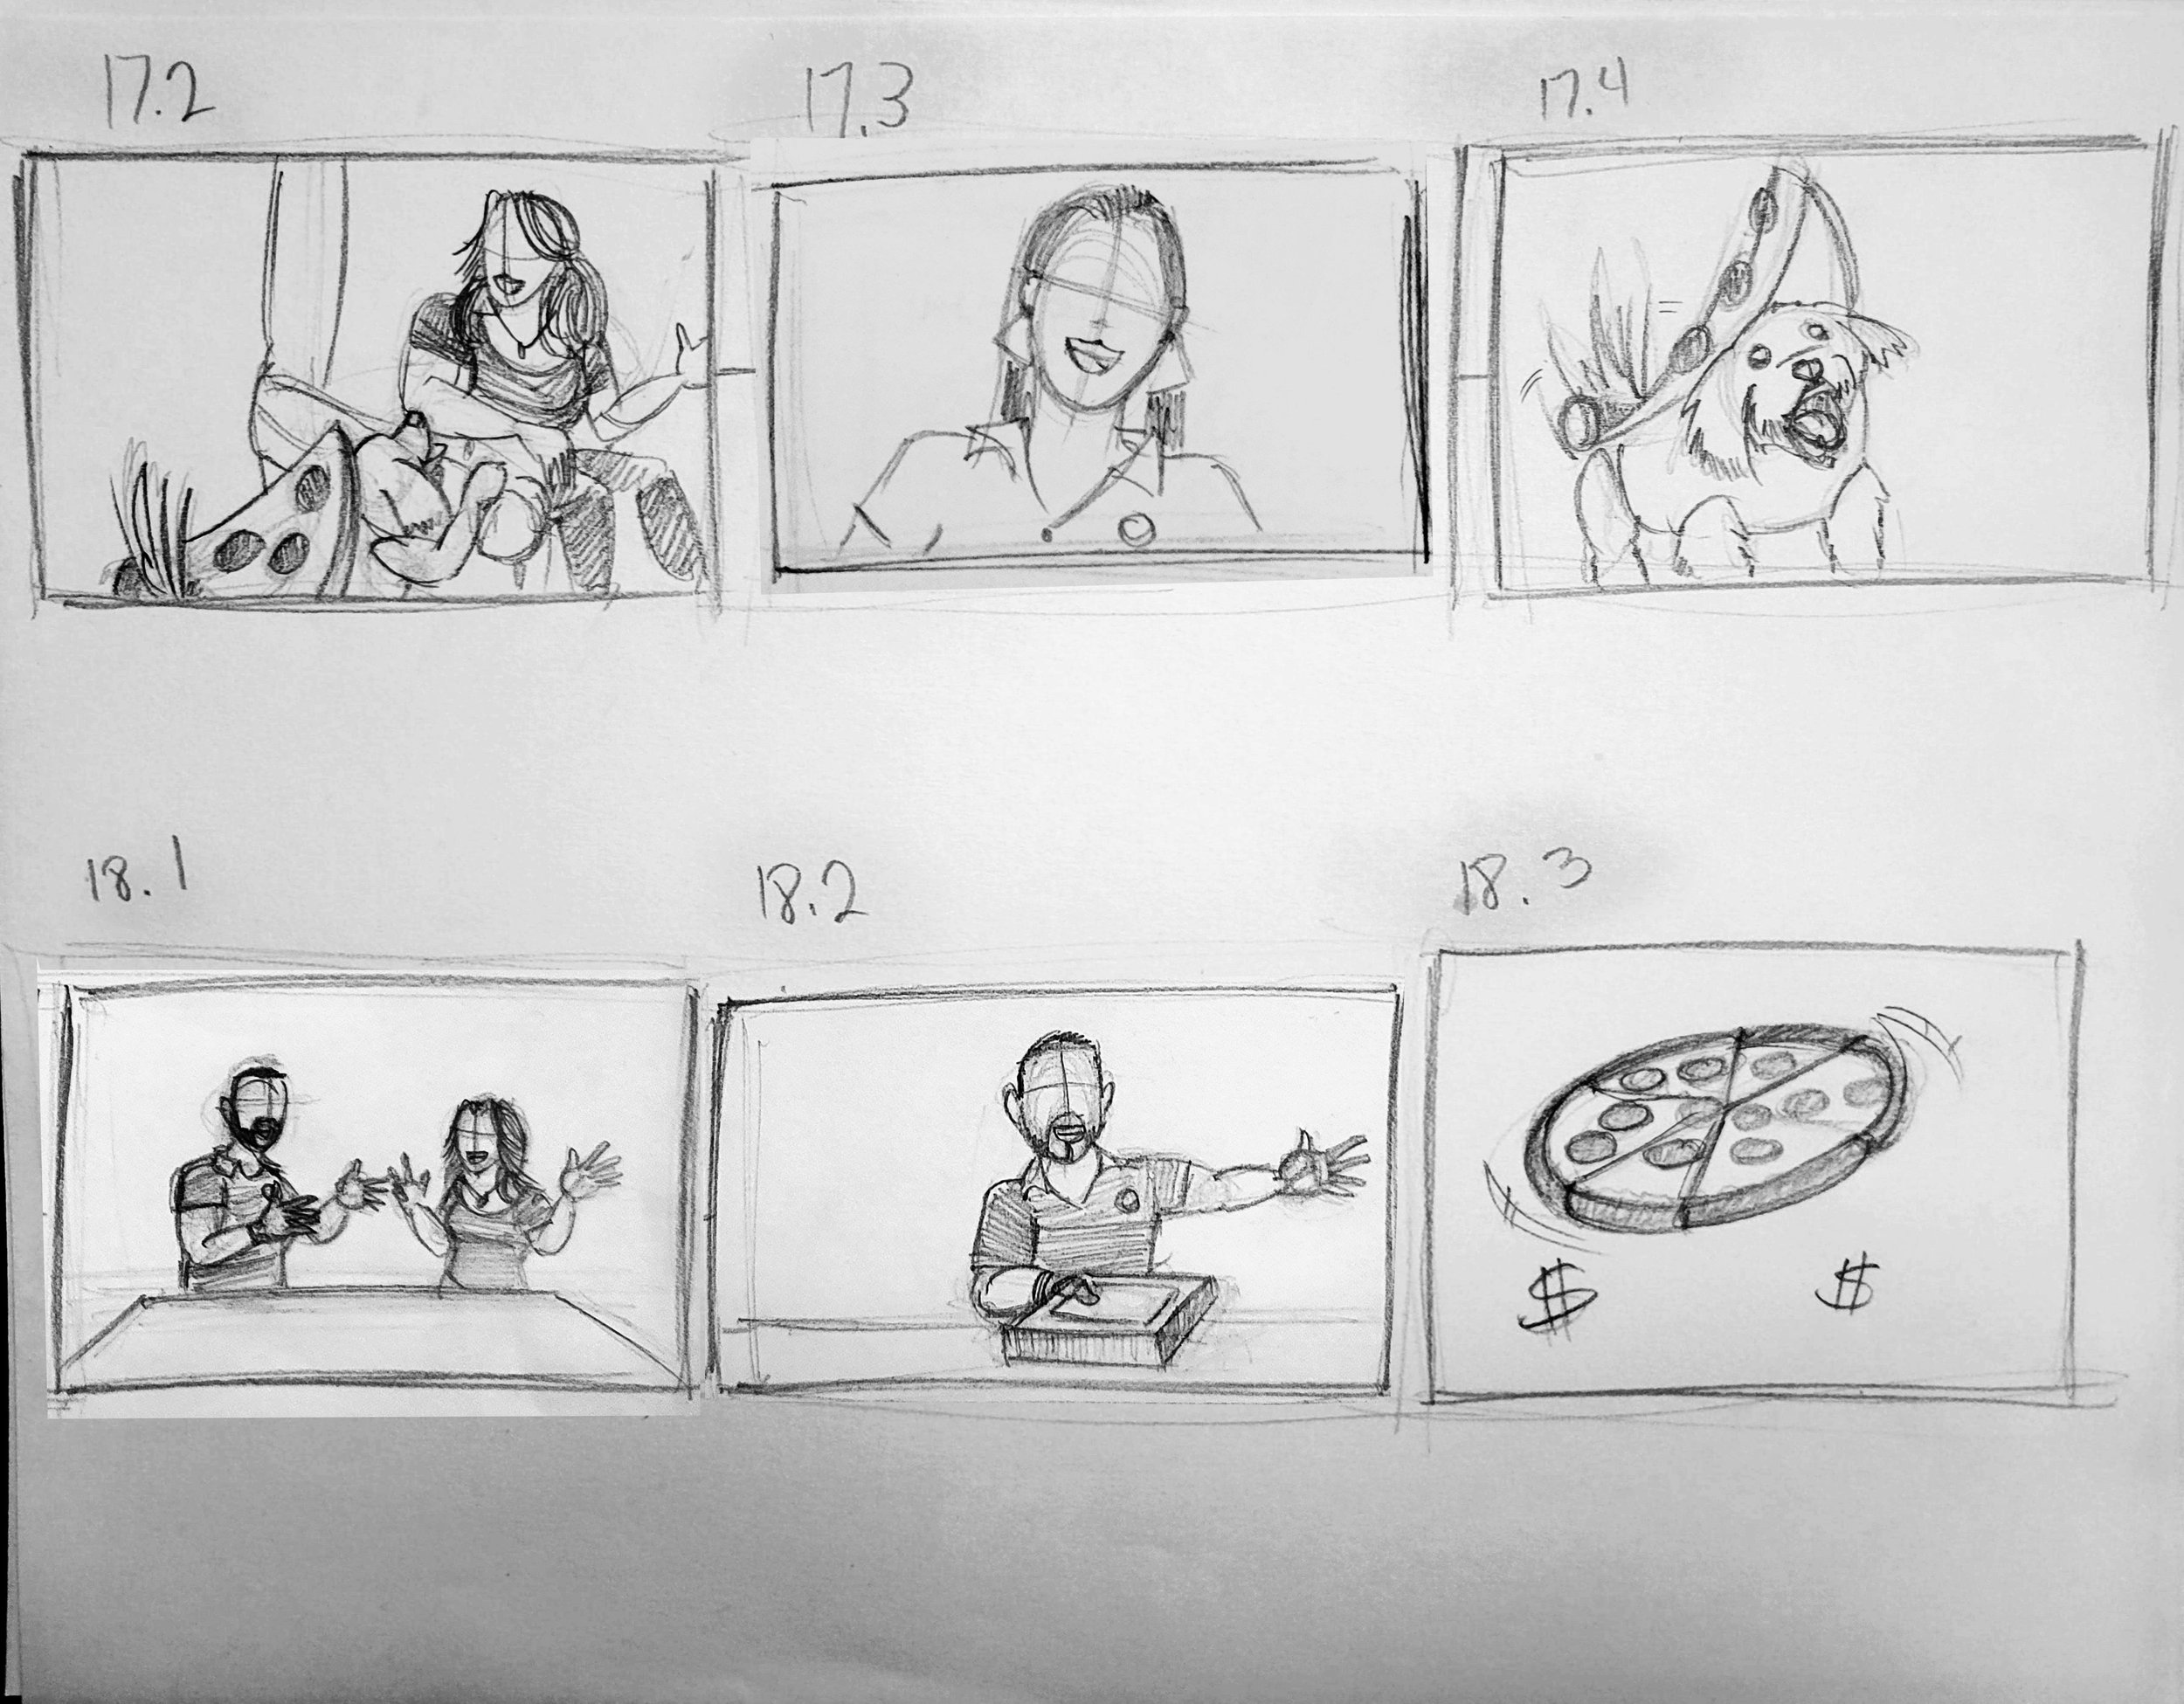 WR_Real_Suite_Eats_S1_E2_StoryBoard_Frames_17_12to_18_3.jpg